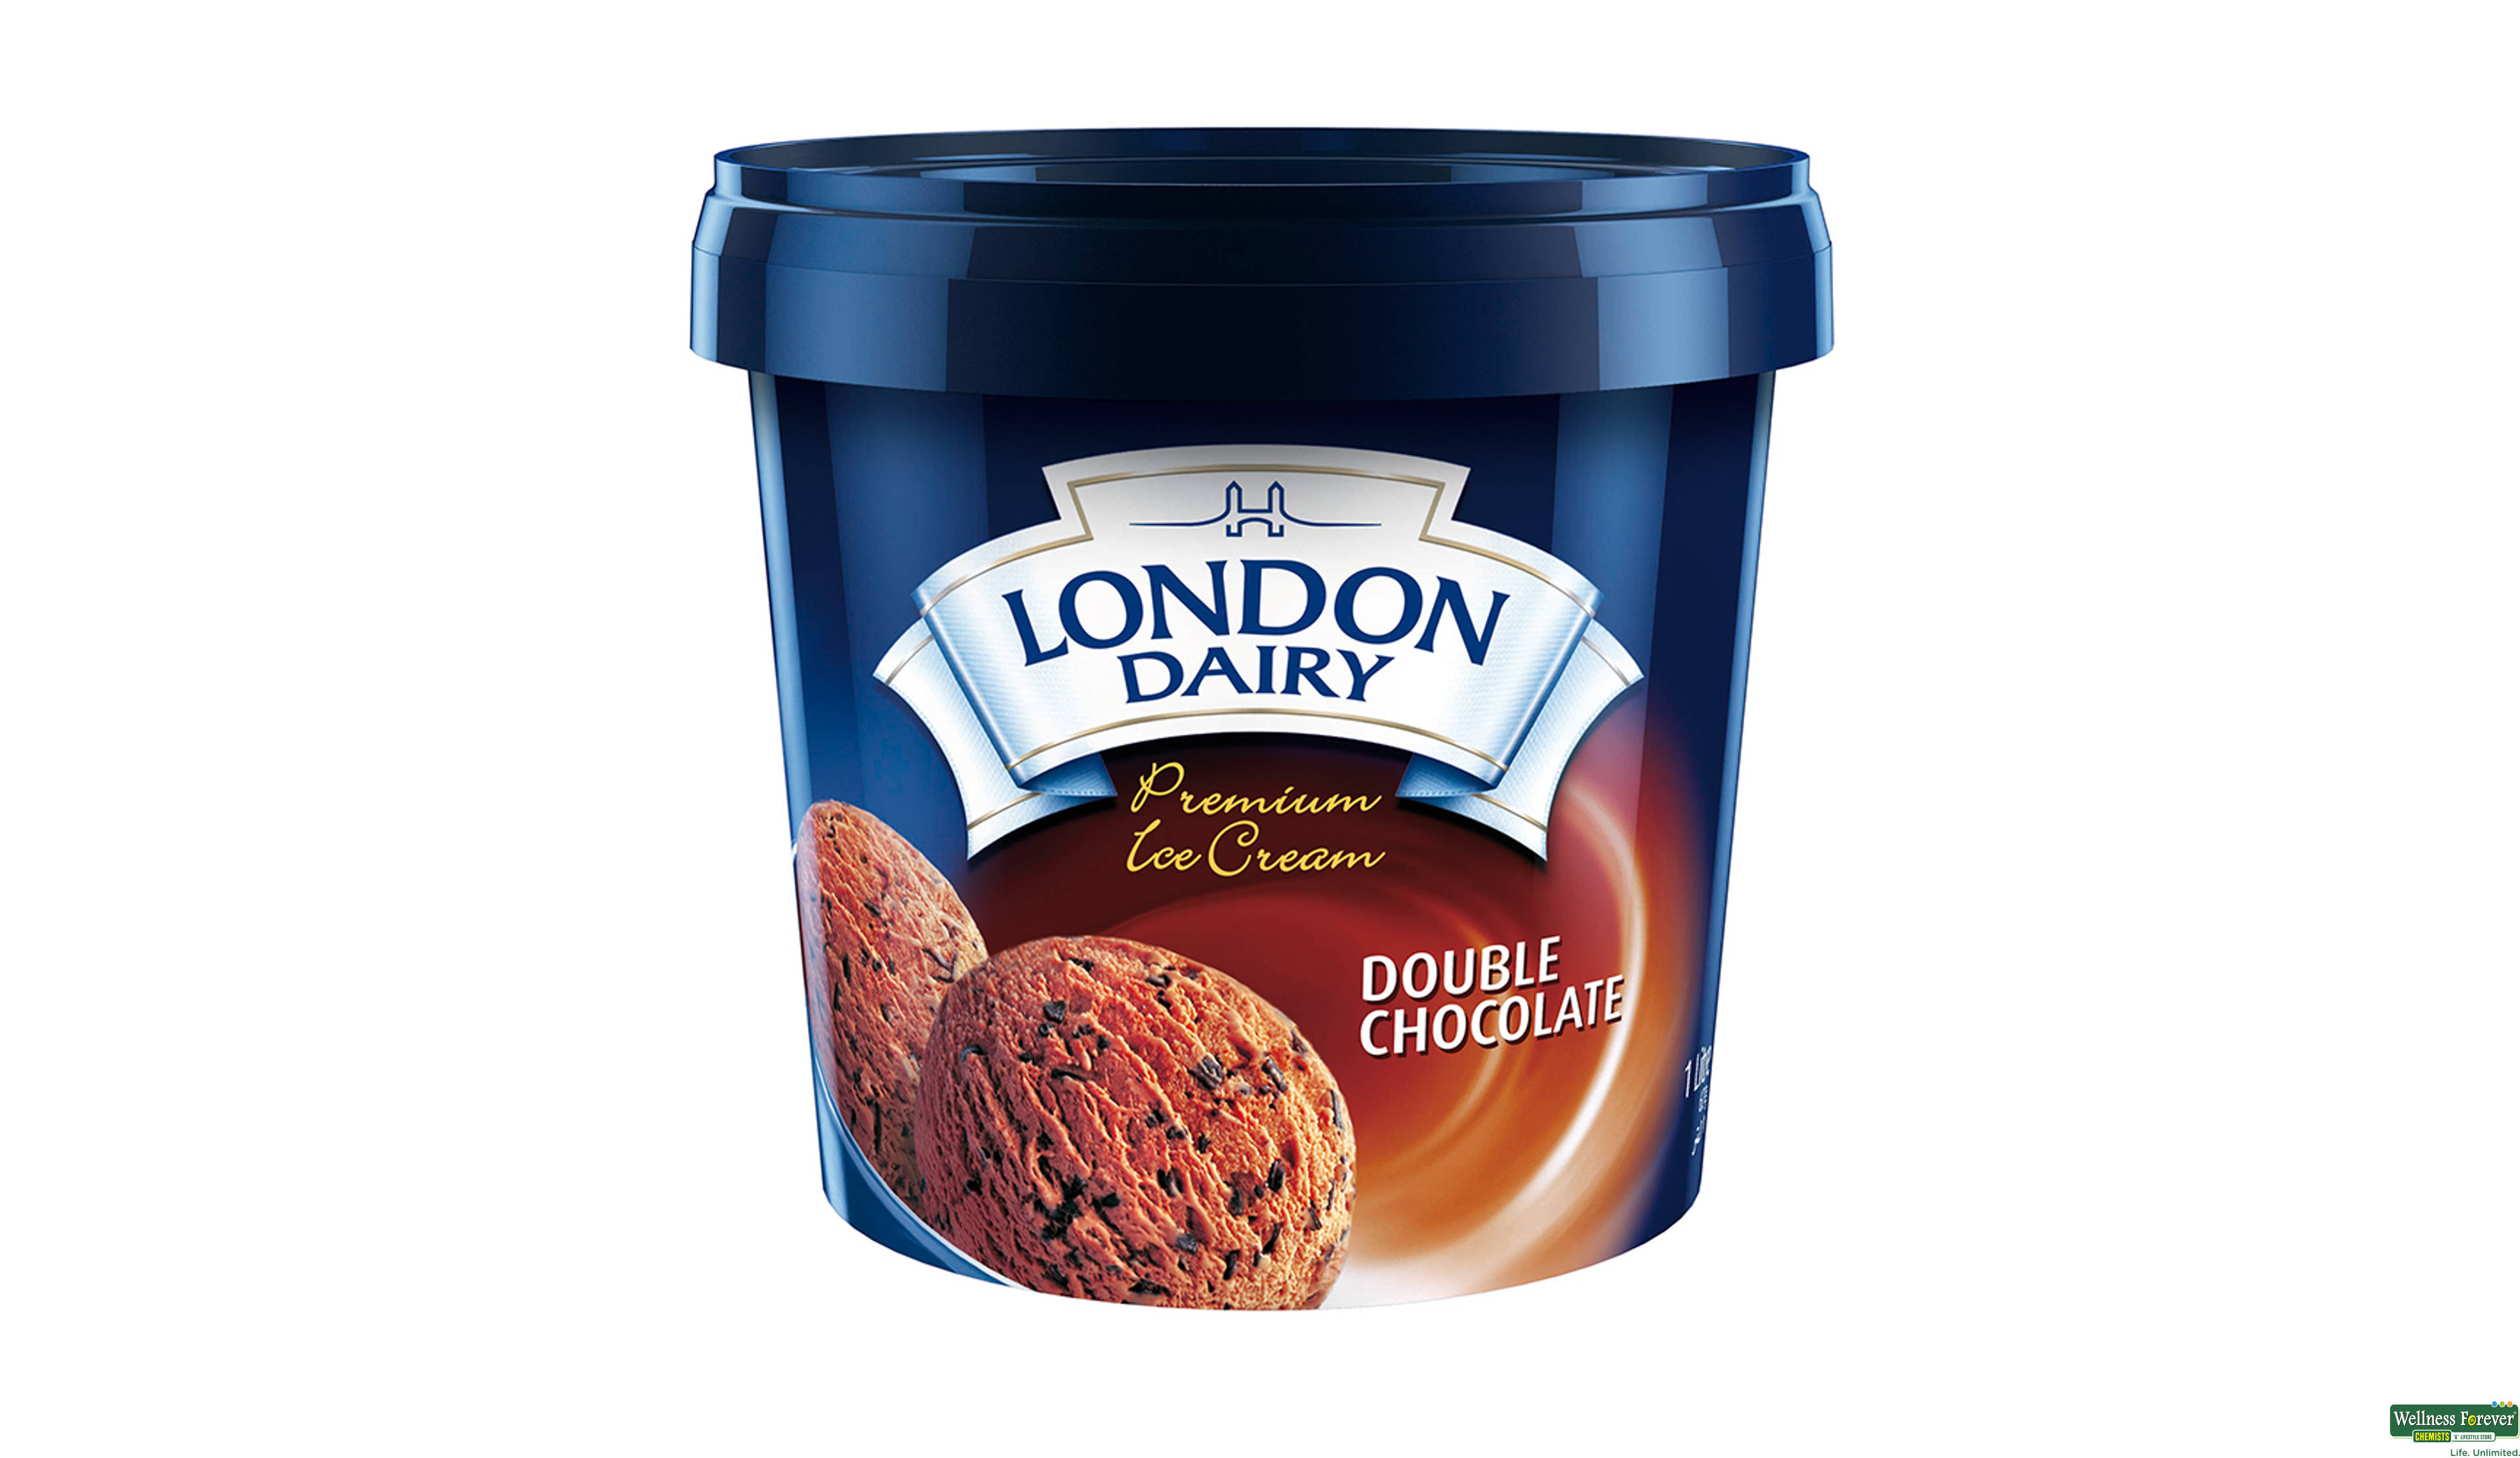 LOND I/C DOUBLE CHOCO 1LTR- 1, 1LTR, 